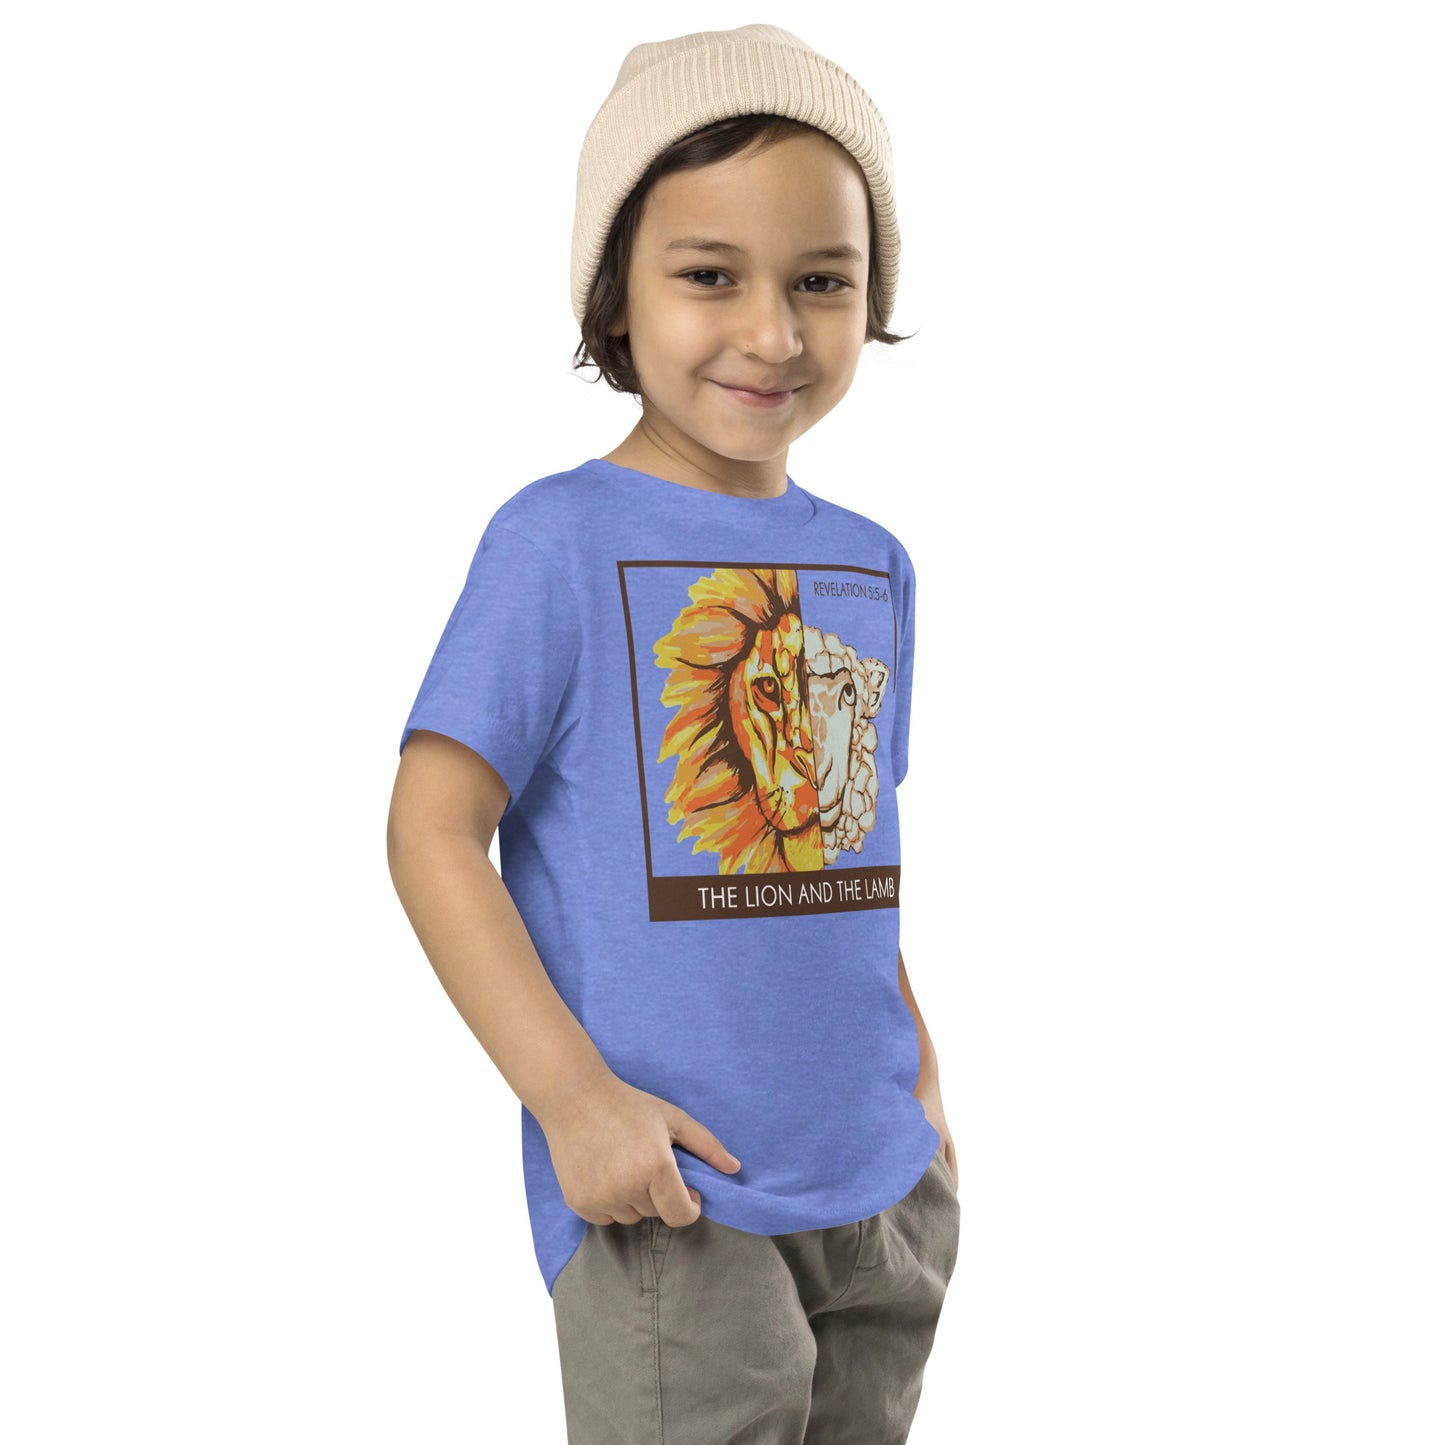 The Lion and the Lamb Toddler Short Sleeve Tee